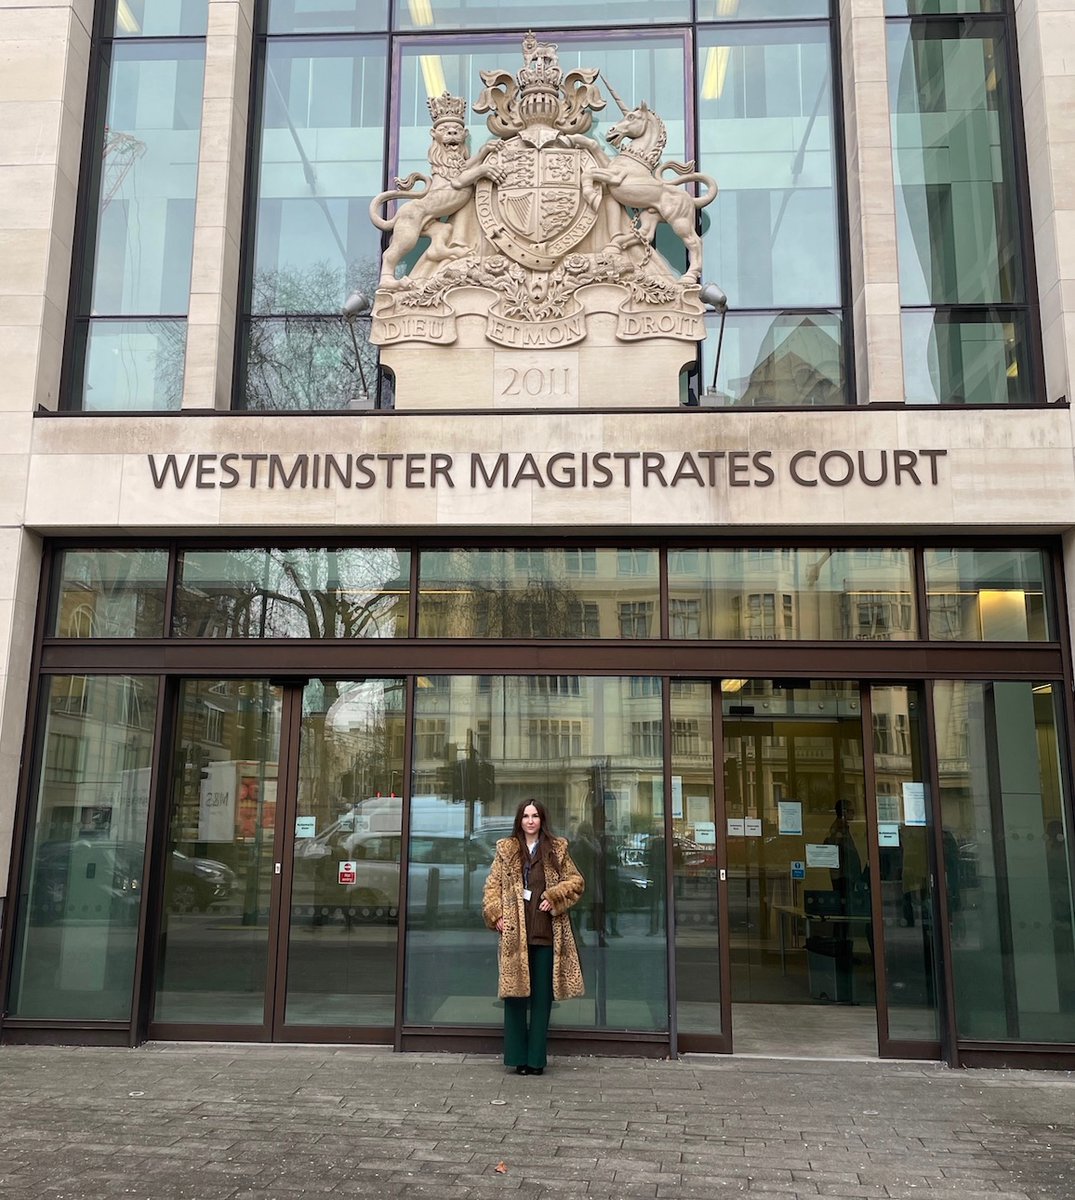 The first time I appeared at Westminster Magistrates Court was in May 2019 as a defendant. Now I’m back as part of the @TogetherMW criminal justice mental health team, ready to support those who’ve found themselves in a tough spot as I once had. Need help? Please get in touch.💛